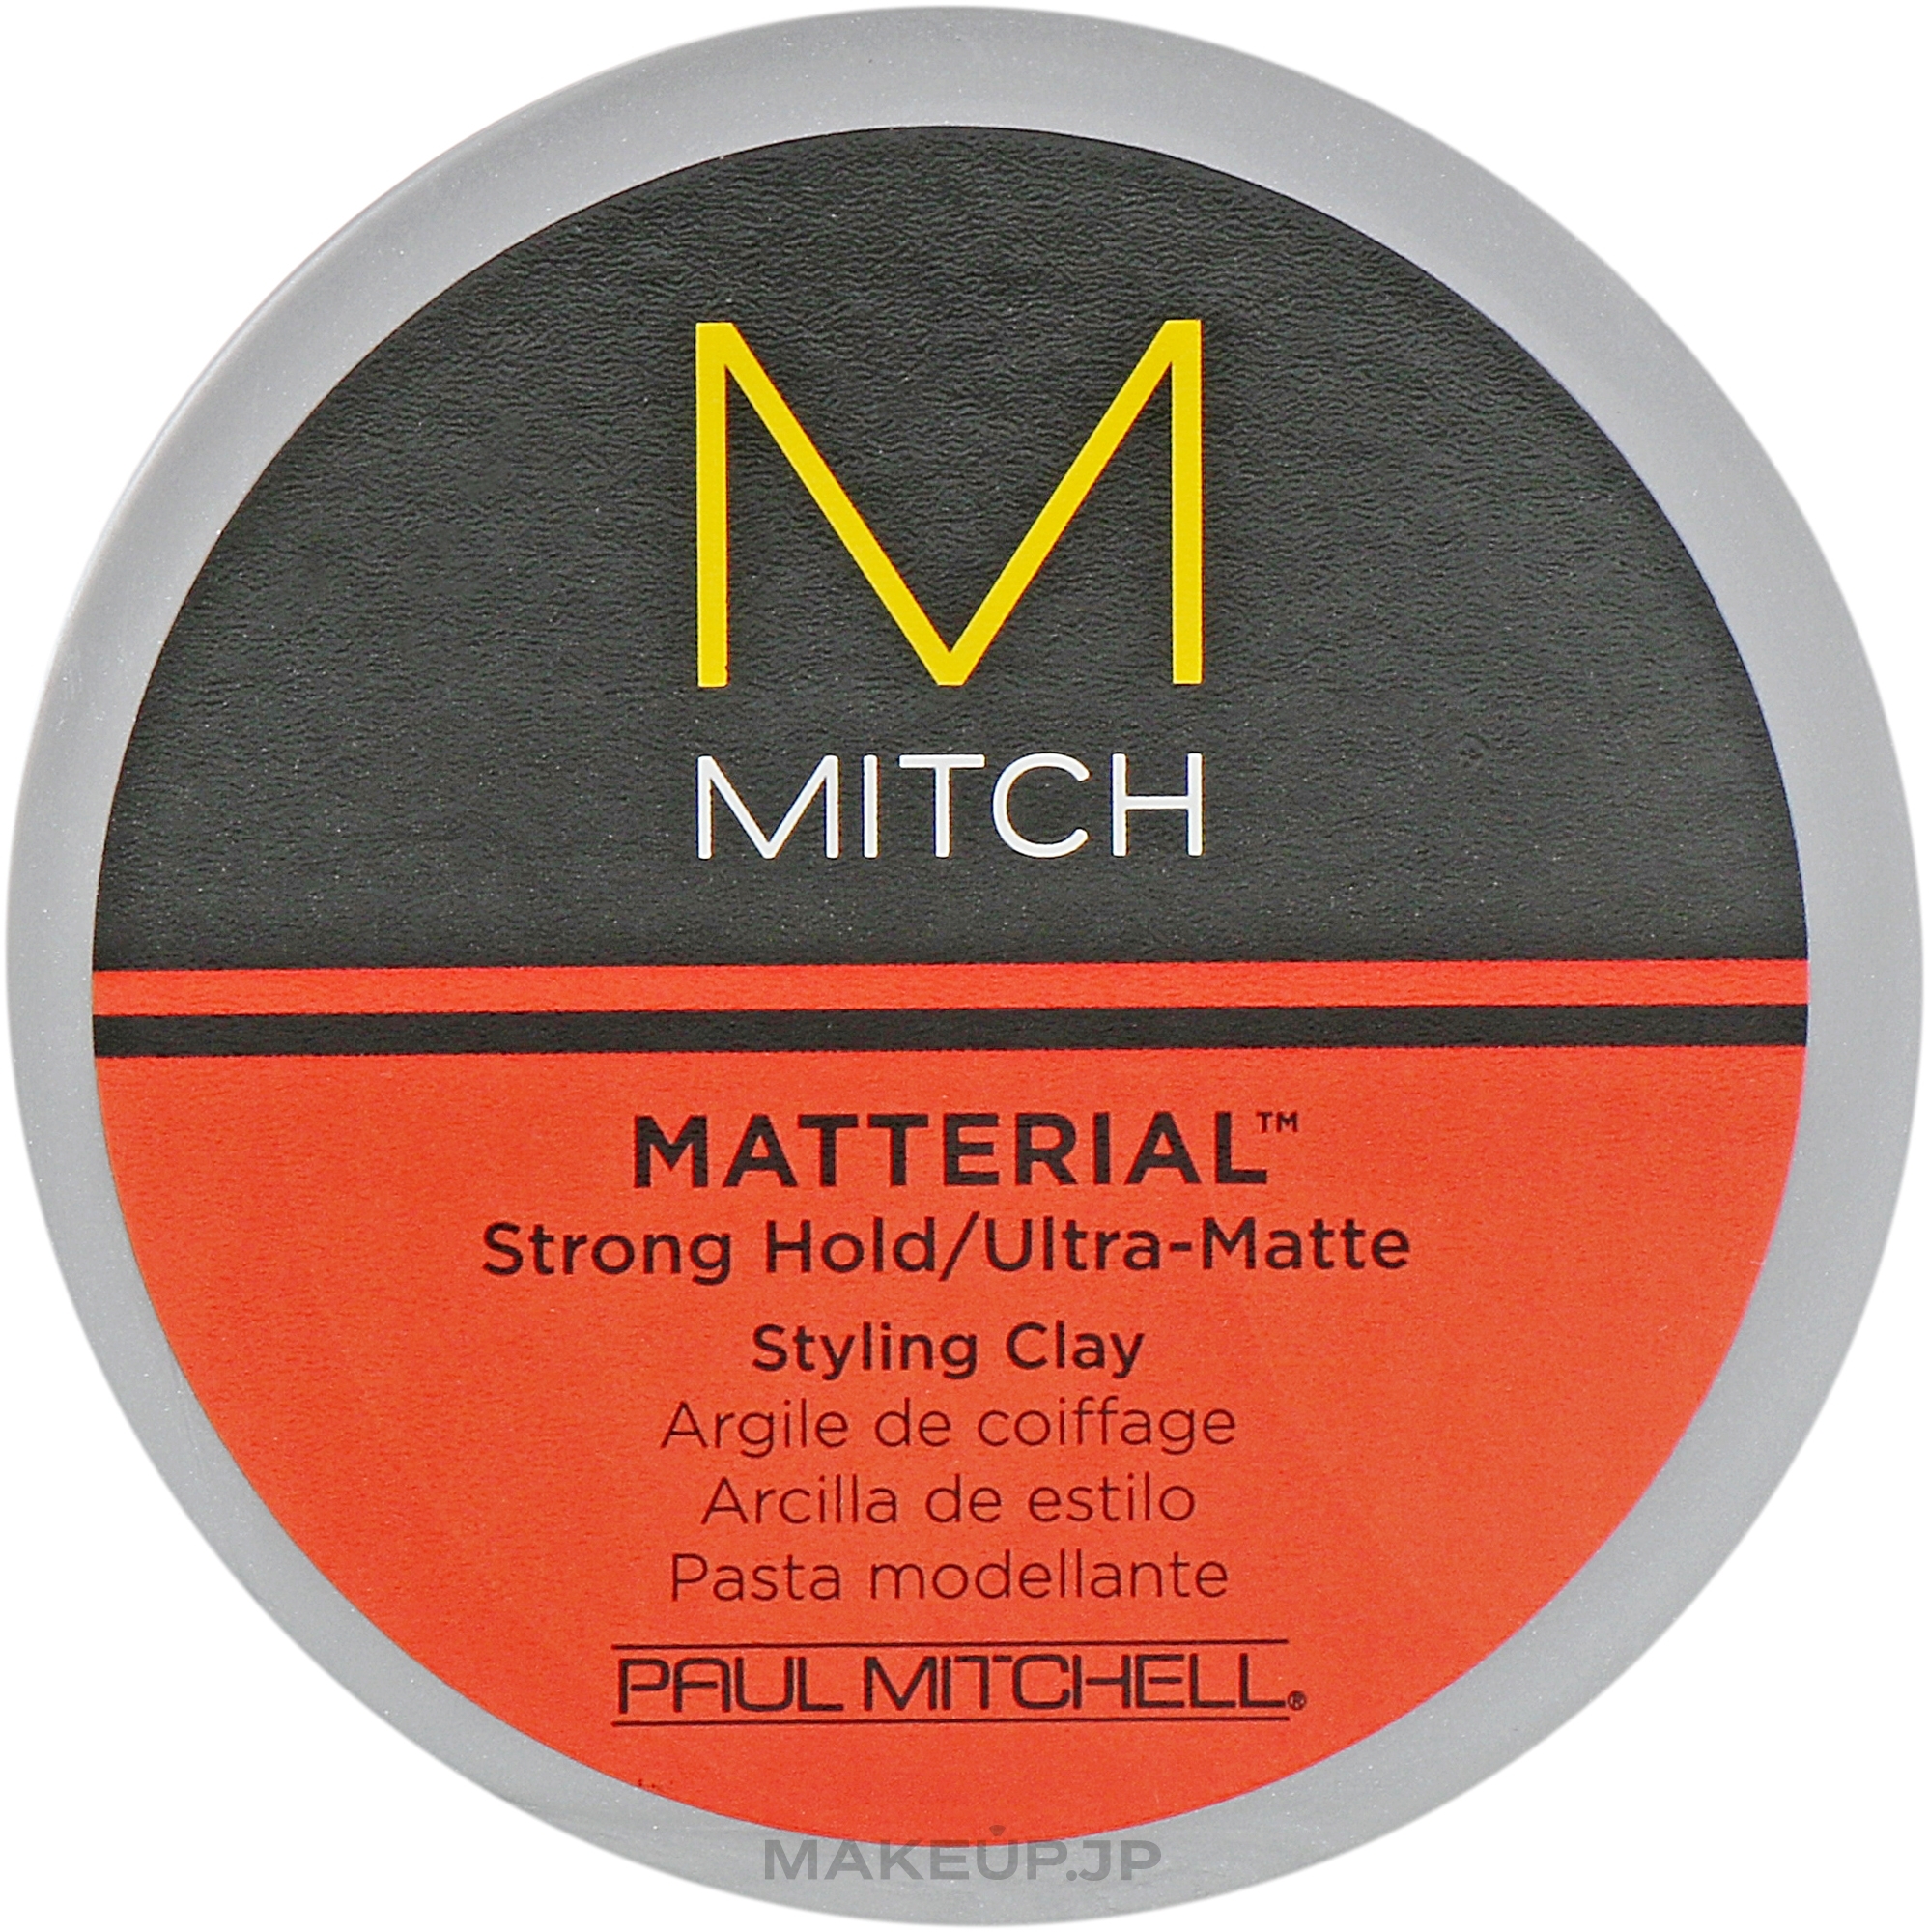 Strong Hold Mattifying Clay - Paul Mitchell Mitch Matterial Styling Clay — photo 85 g